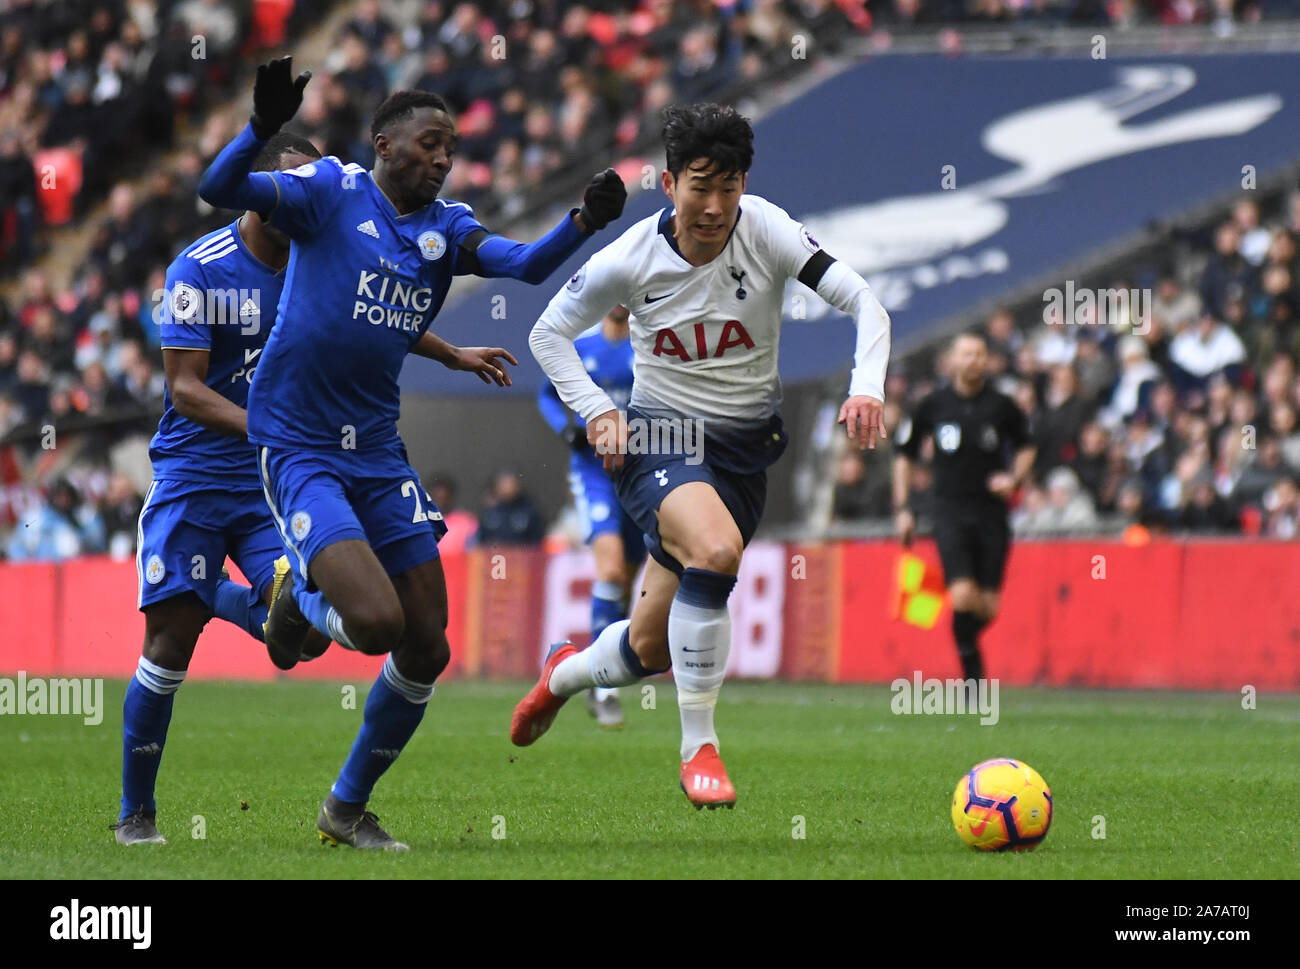 LONDON, ENGLAND - FEBRUARY 10, 2019: Wilfred Ndidi of Leicester (L) and Heung-Min Son of Tottenham (R) pictured during the 2018/19 Premier League game between Tottenham Hotspur and Leicester City at Wembley Stadium. Stock Photo